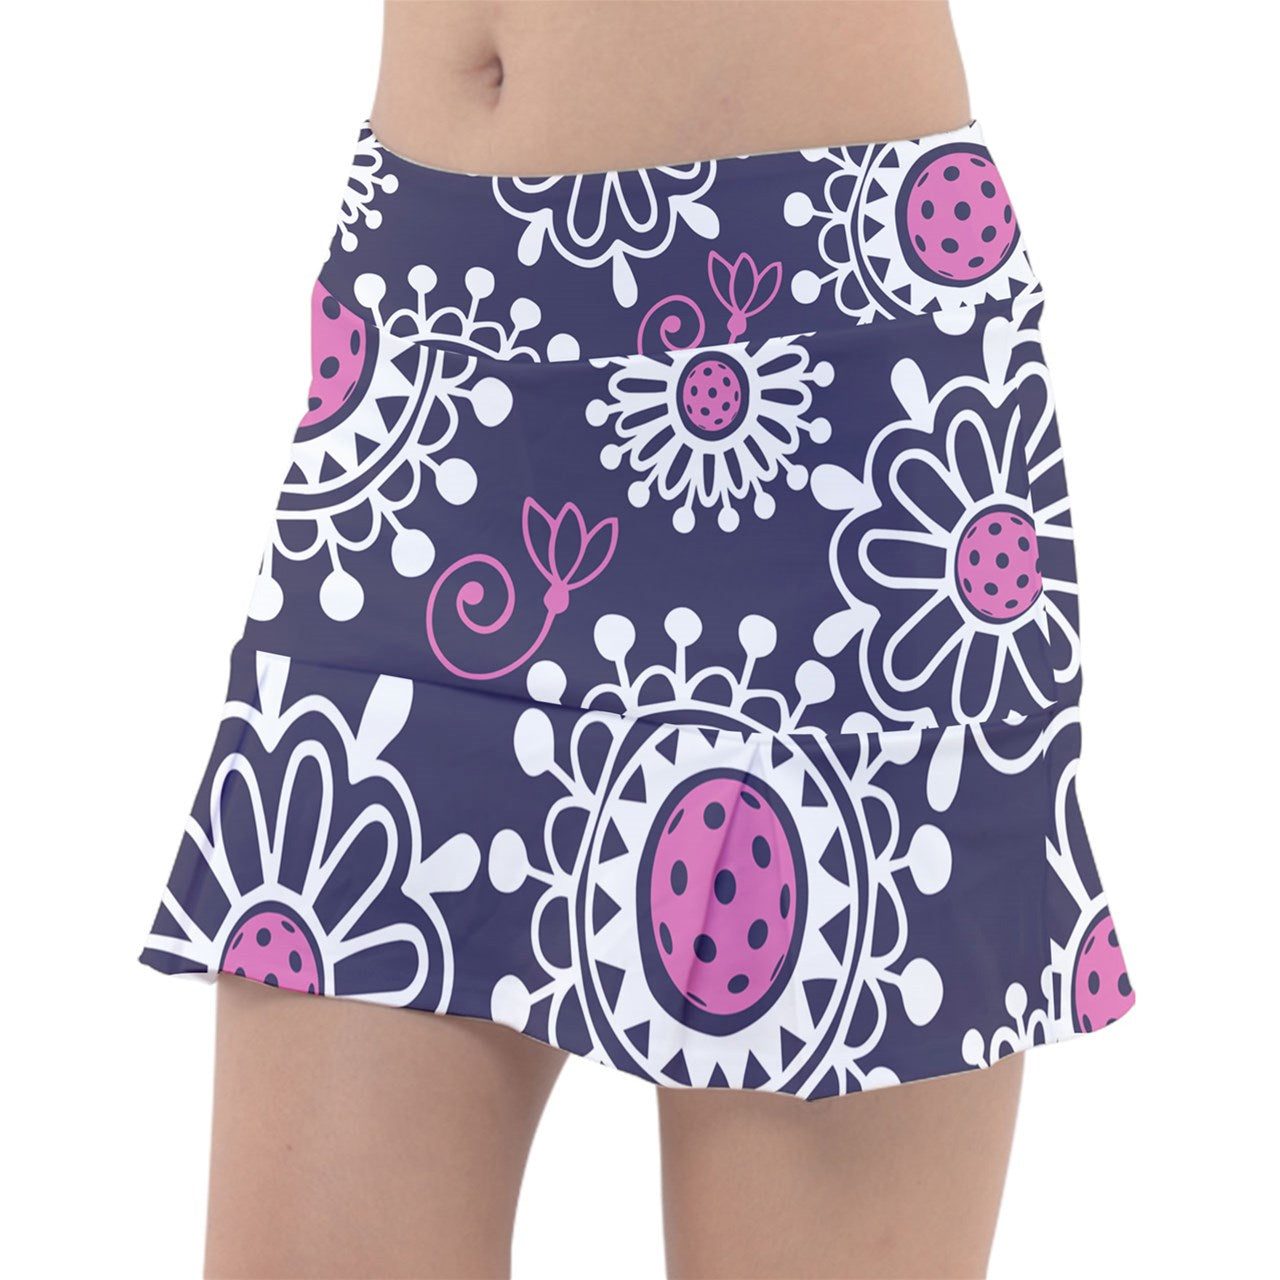 Coming Up Daisies in Plum & Pink